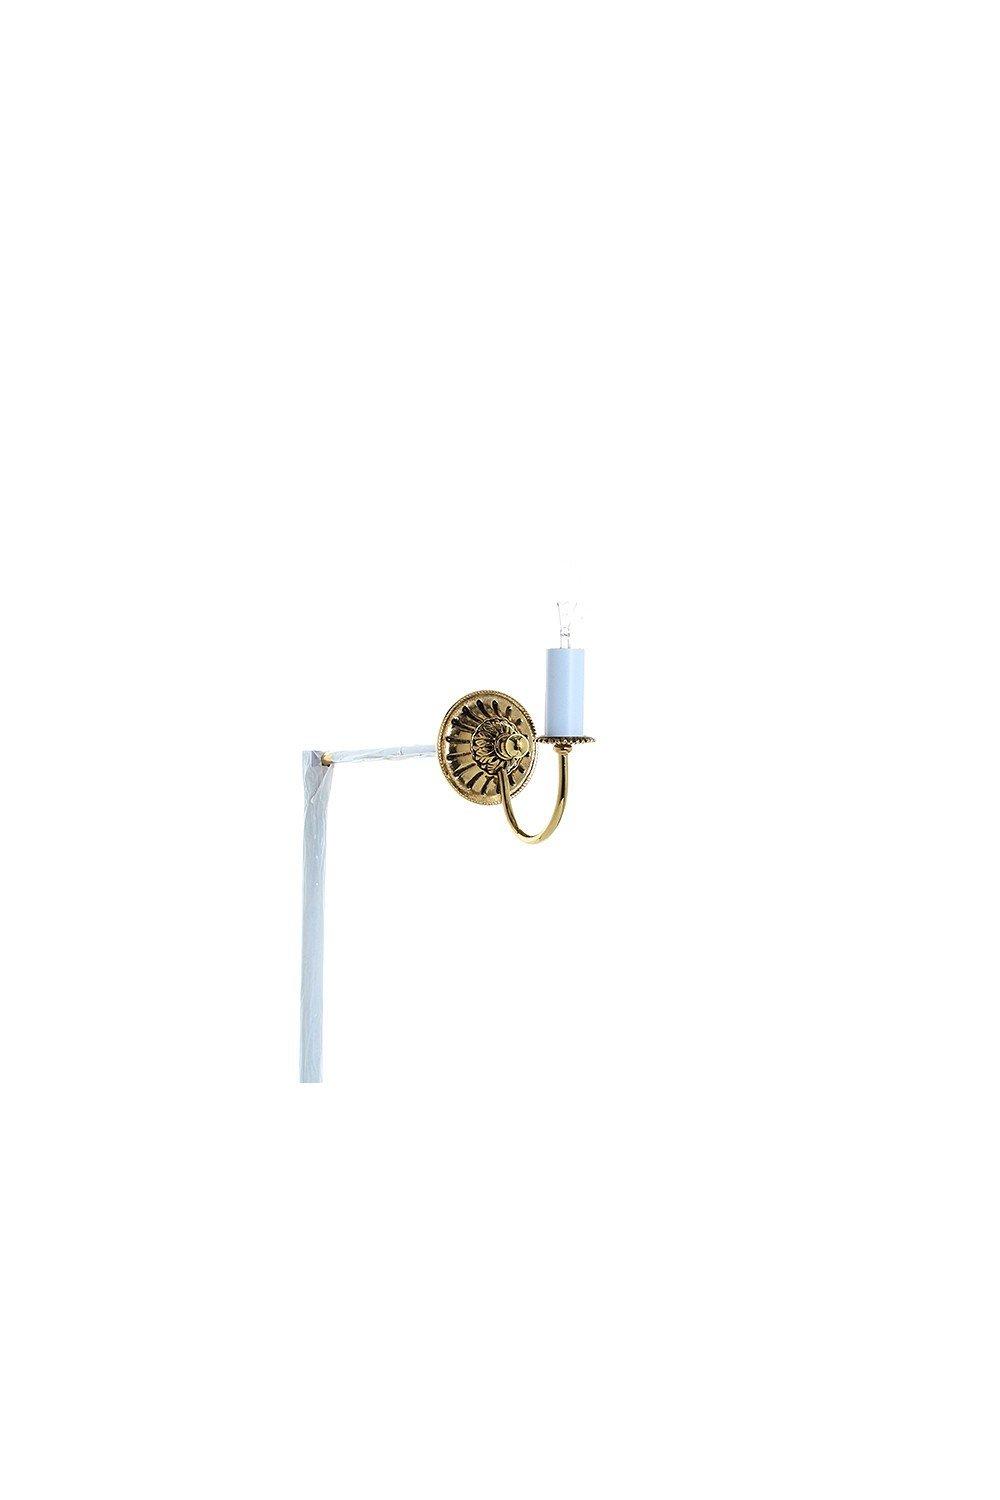 Solar 1 Light Polished Brass Candle Wall Lamp